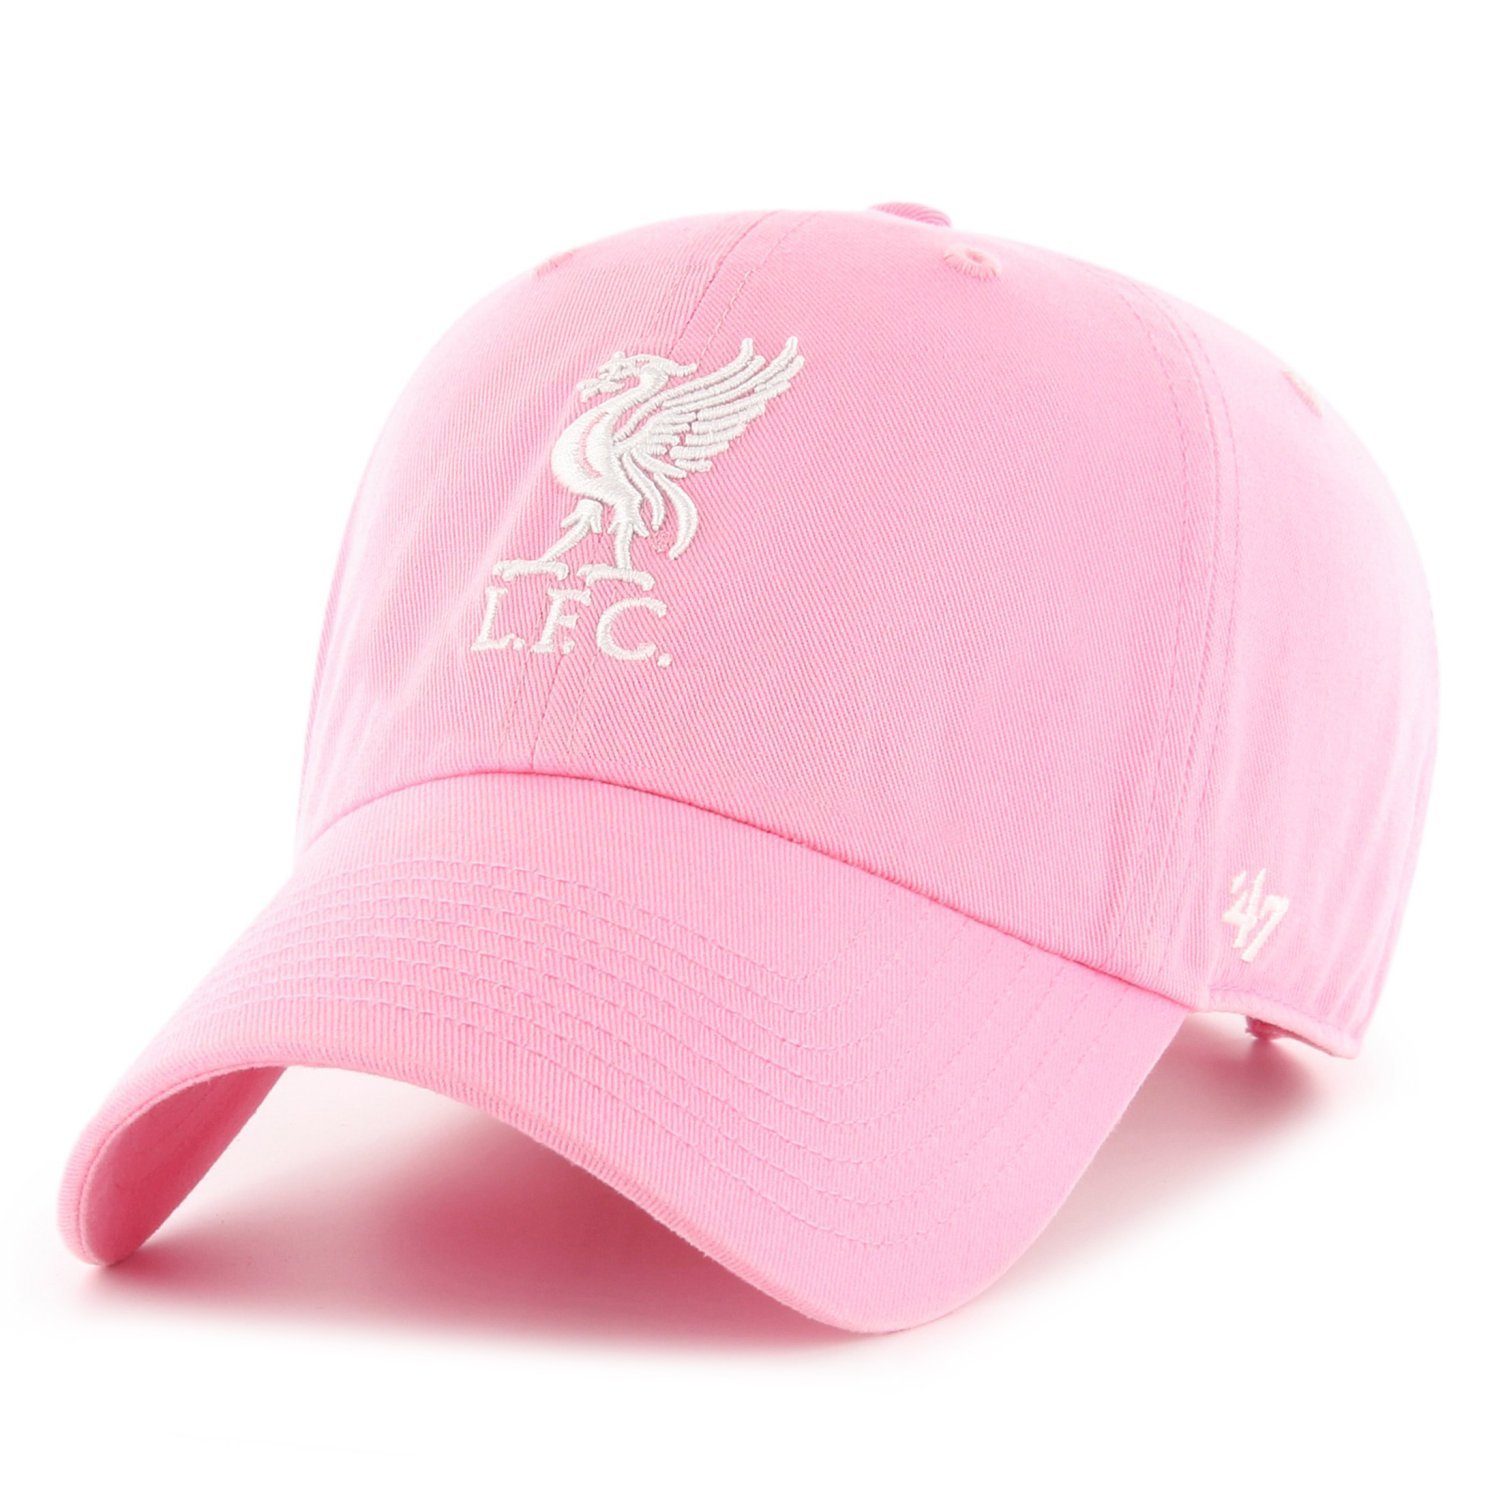 x27;47 Brand Fit FC Relaxed Liverpool UP Trucker Cap CLEAN